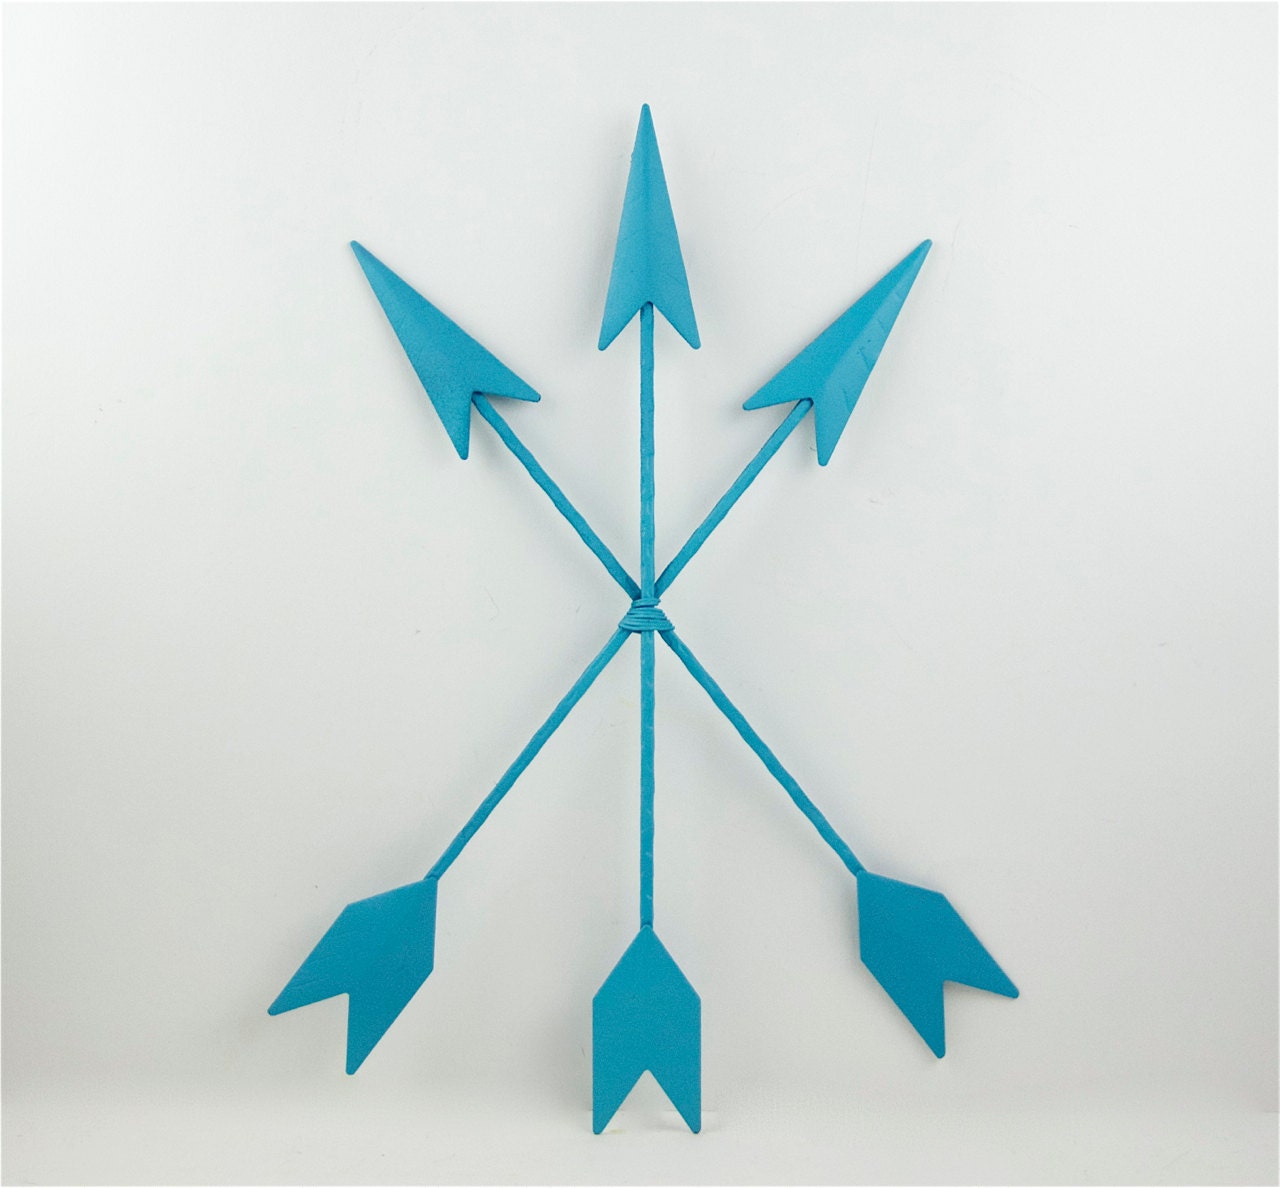 Popular items for arrows for decor on Etsy